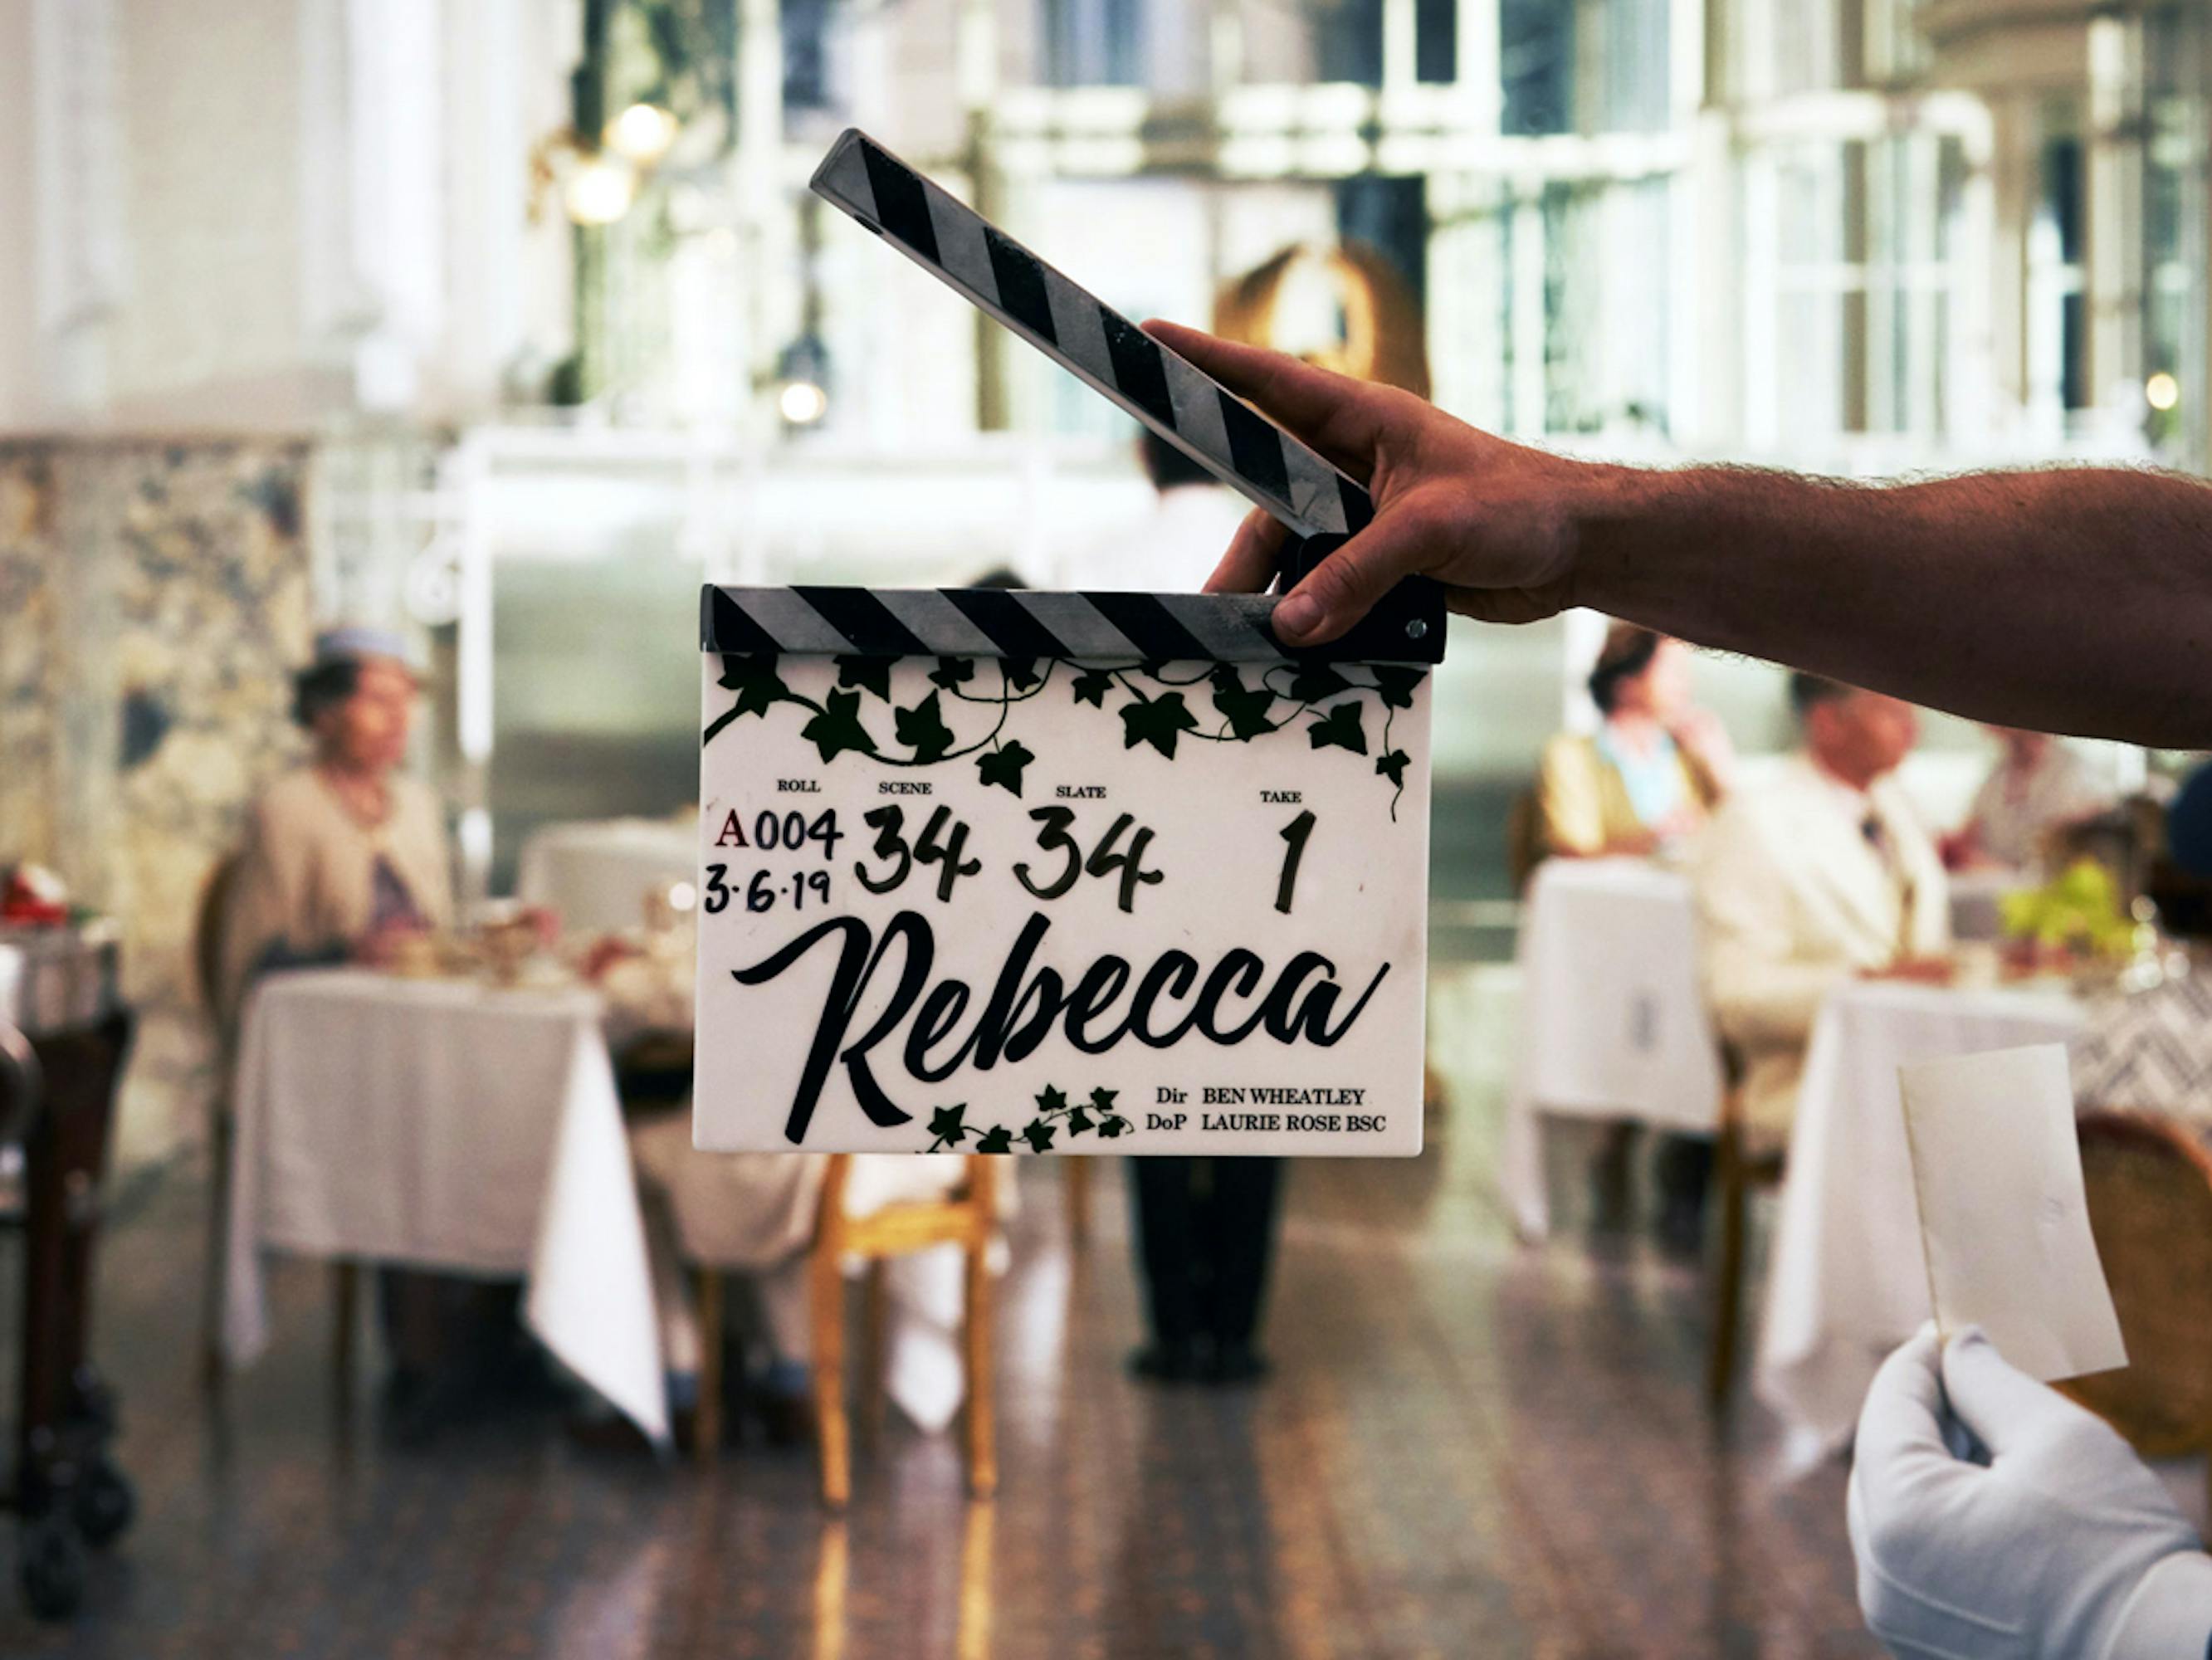 Clapperboard from the set of *Rebecca*